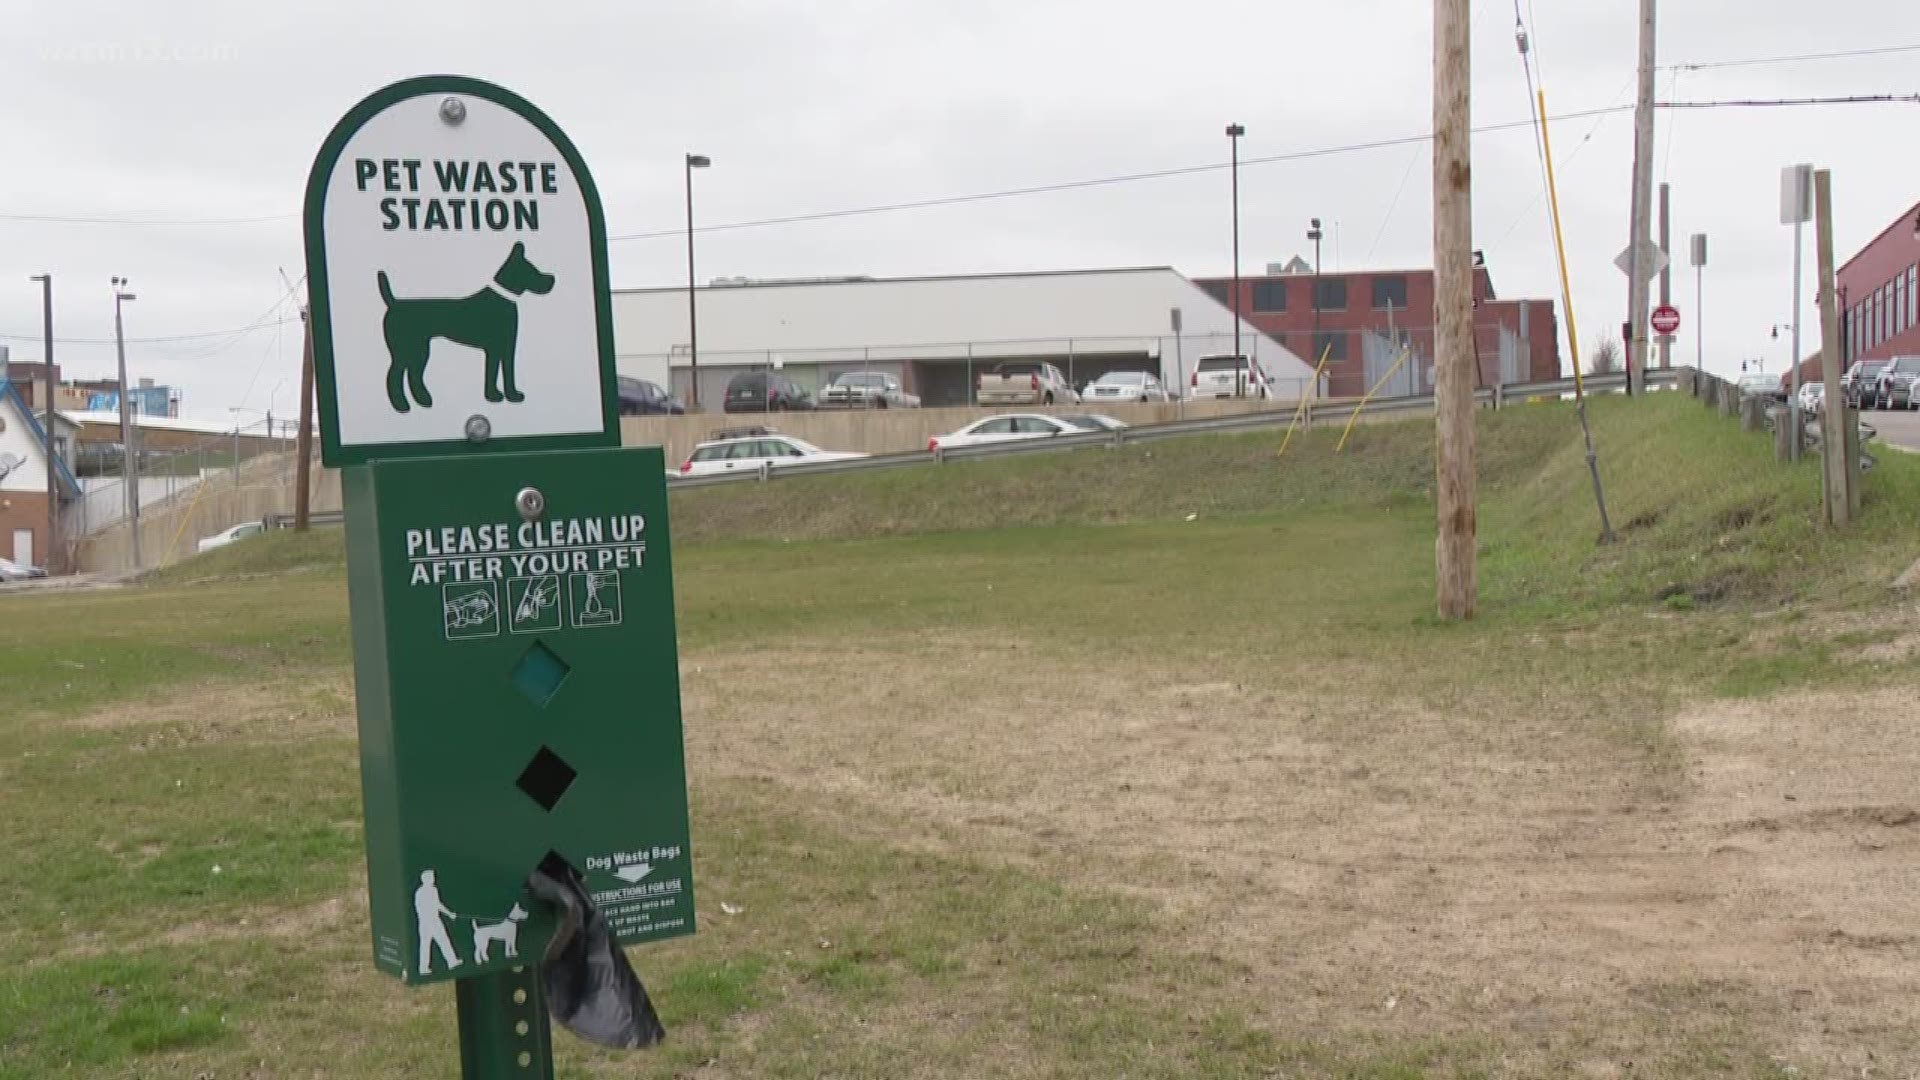 The dog park funding is a part of the Grand Rapids Downtown Development Authority Board's key agenda for the Wednesday meeting.